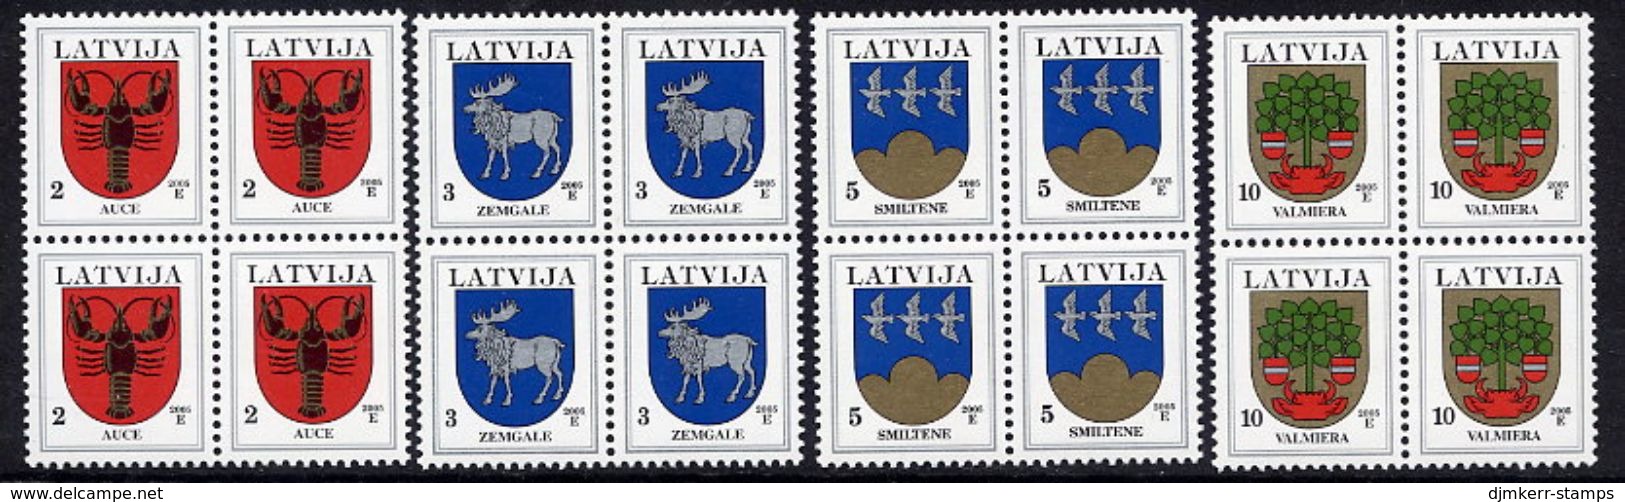 LATVIA 2005 Arms Definitives With Year Date 2005 In Blocks Of 4 MNH / **. - Latvia